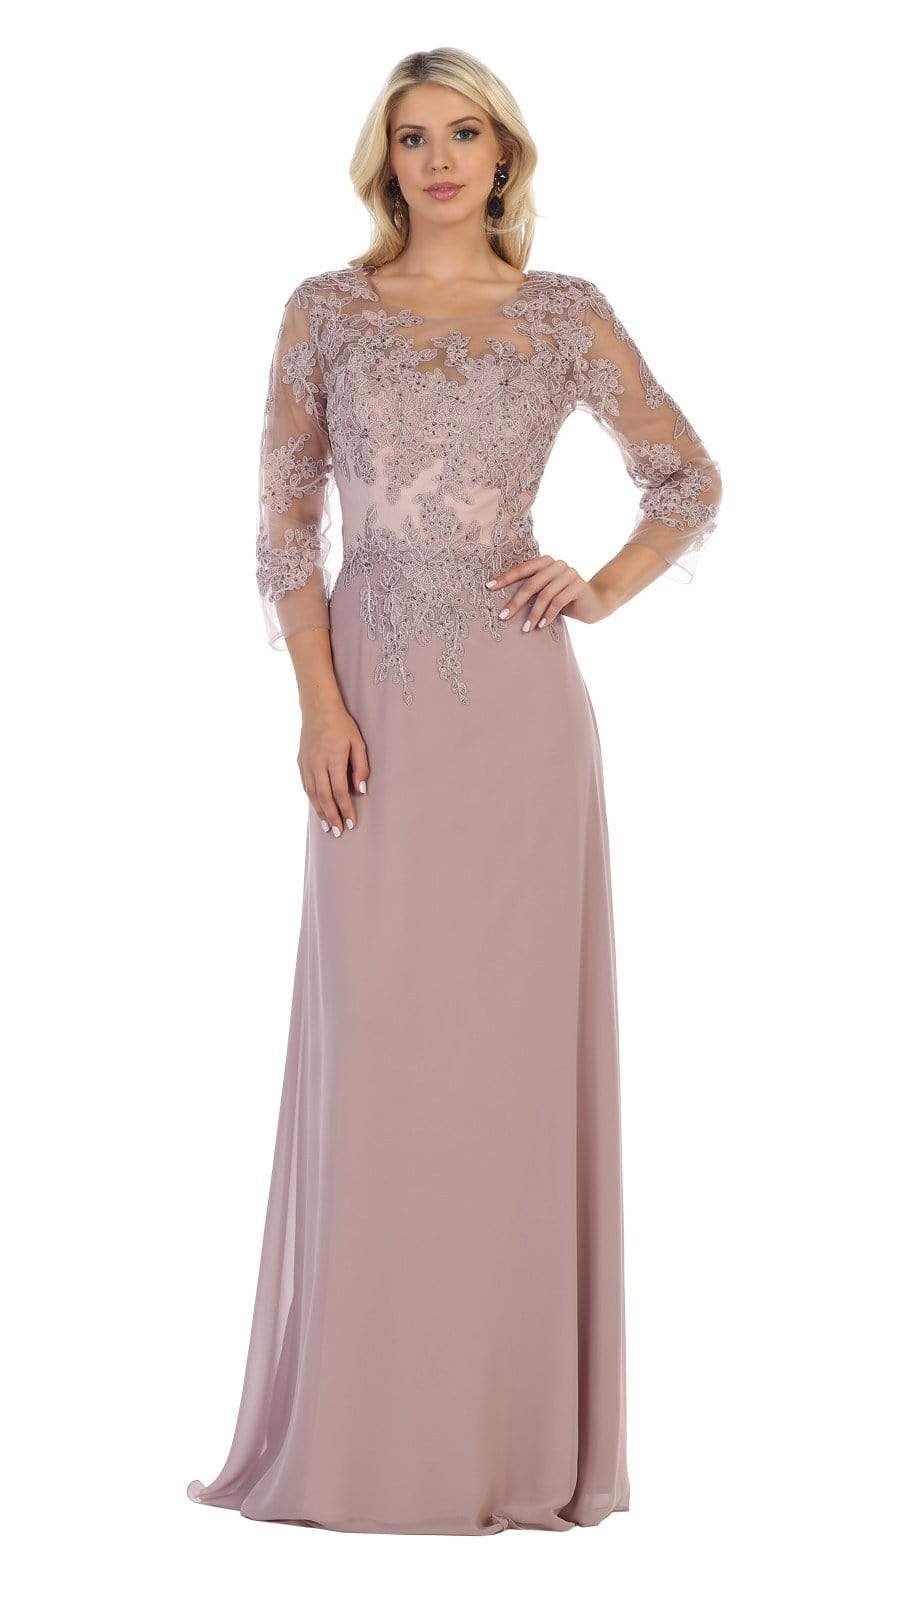 Image of May Queen - MQ1637 Illusion Quarter Sleeve Appliqued Sheath Gown